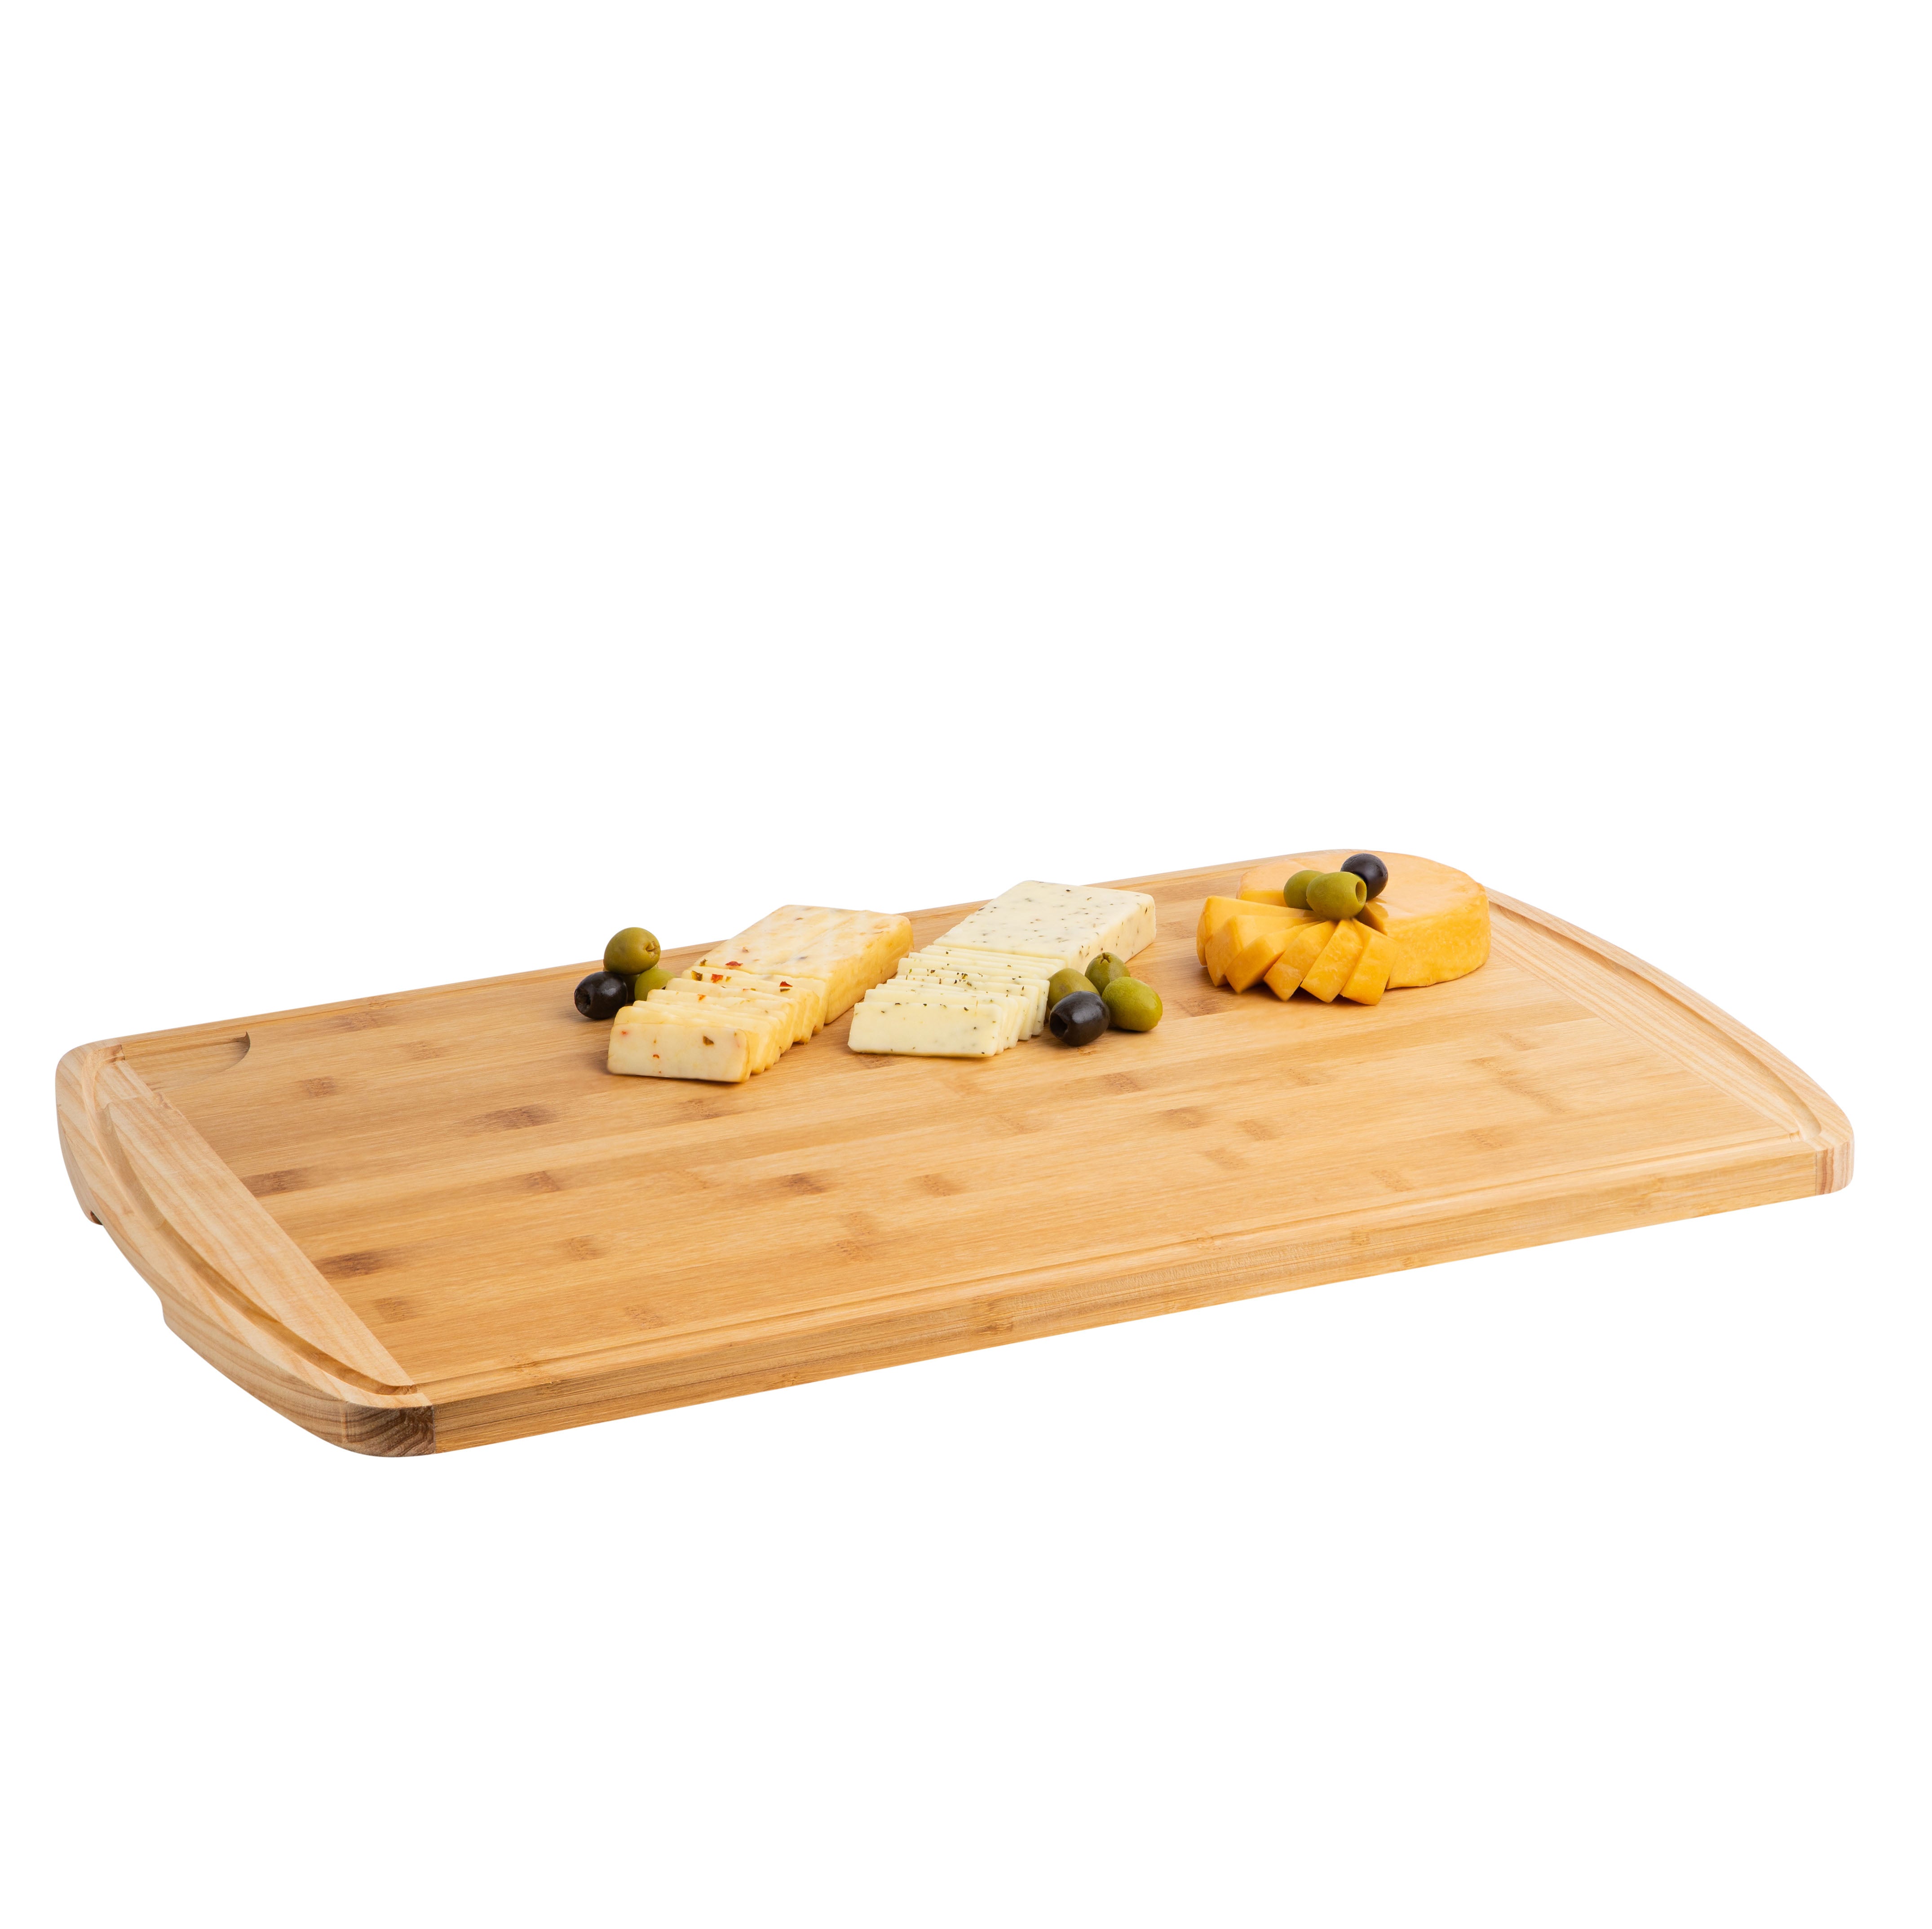 Bamboo Cutting Board Tray 23.5L x 15.5W x 0.7H Eco Friendly Kitchen Gadget Wooden Serving Trays for Meat, Vegetables, Cheese and Charcuterie Board